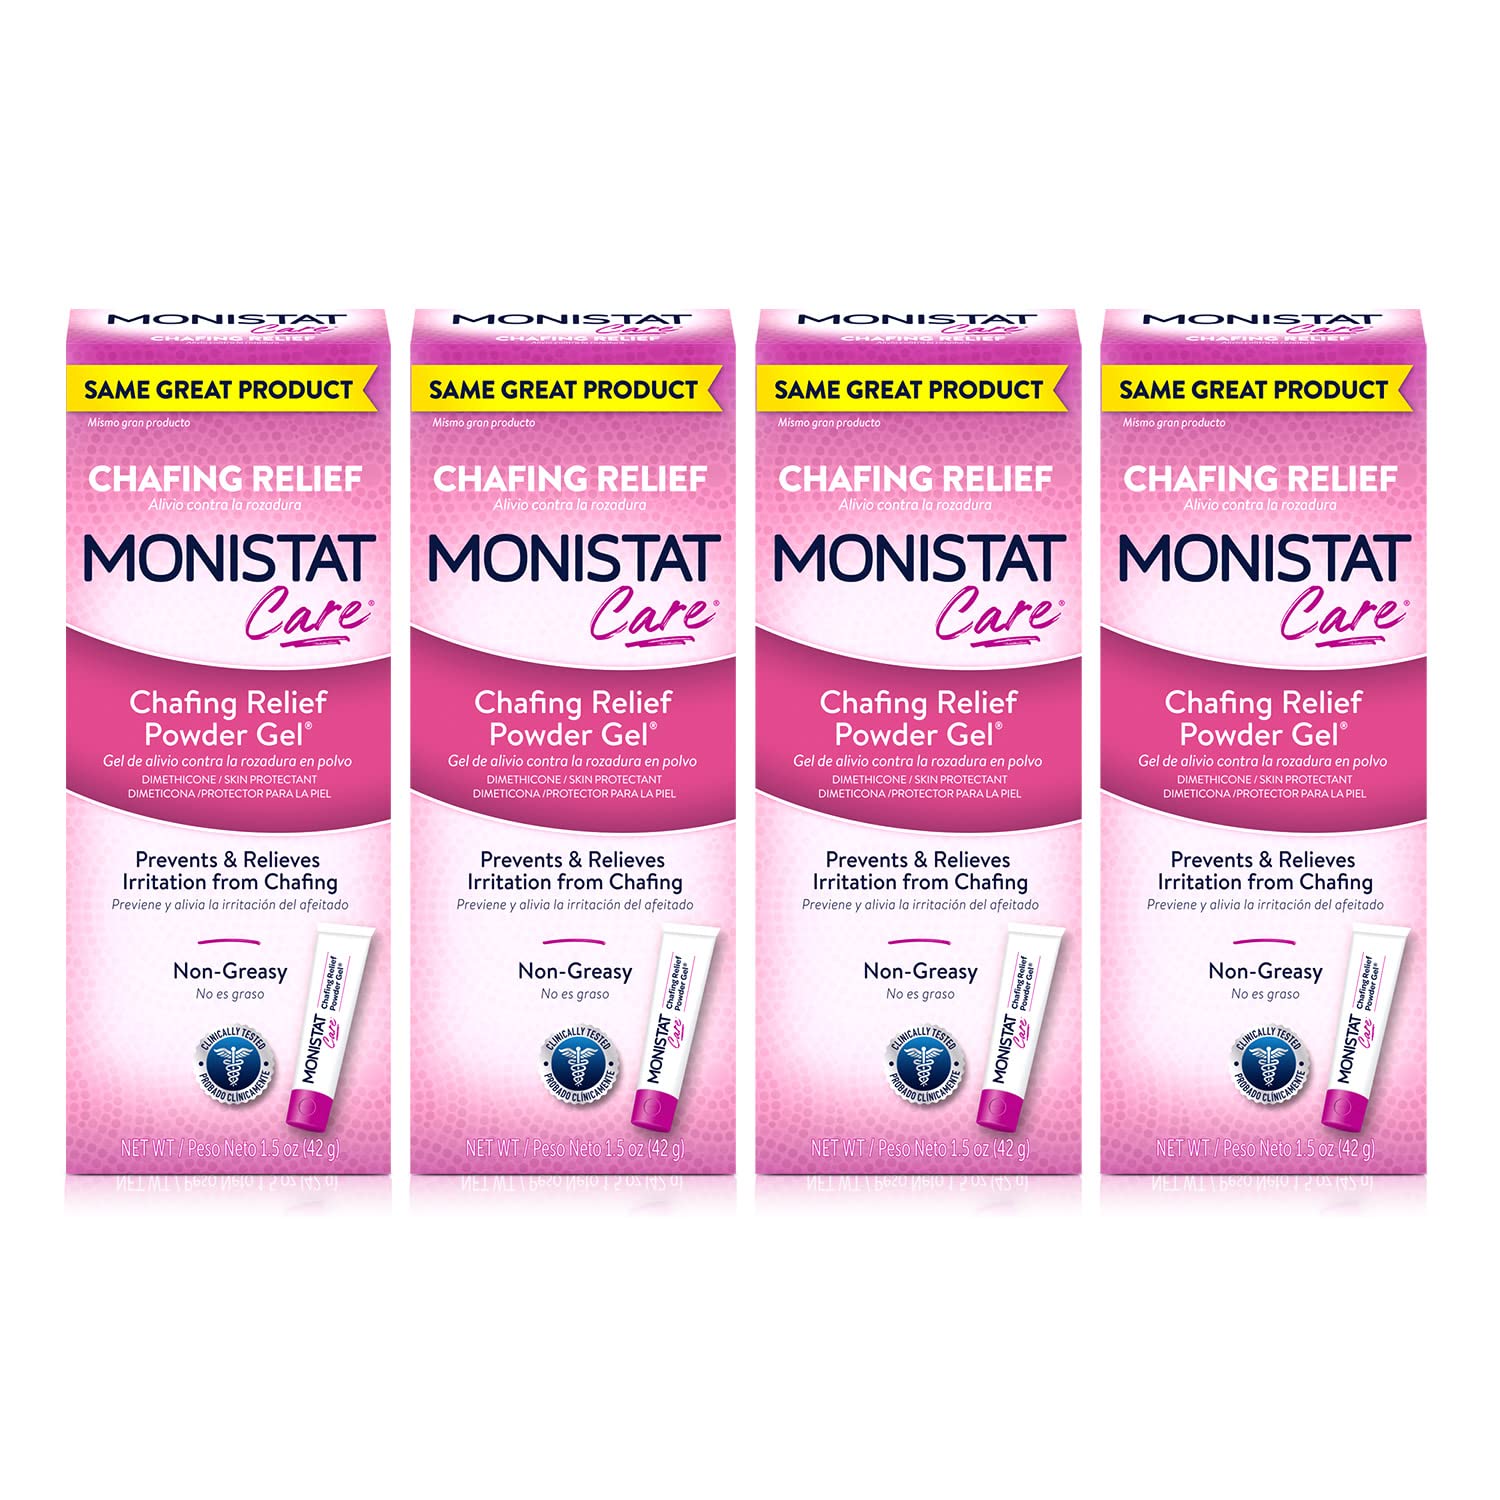 MONISTAT Care Chafing Relief Powder Gel, Anti-Chafe Protection, 1.5 oz, 4  Pack 1.5 Ounce (Pack